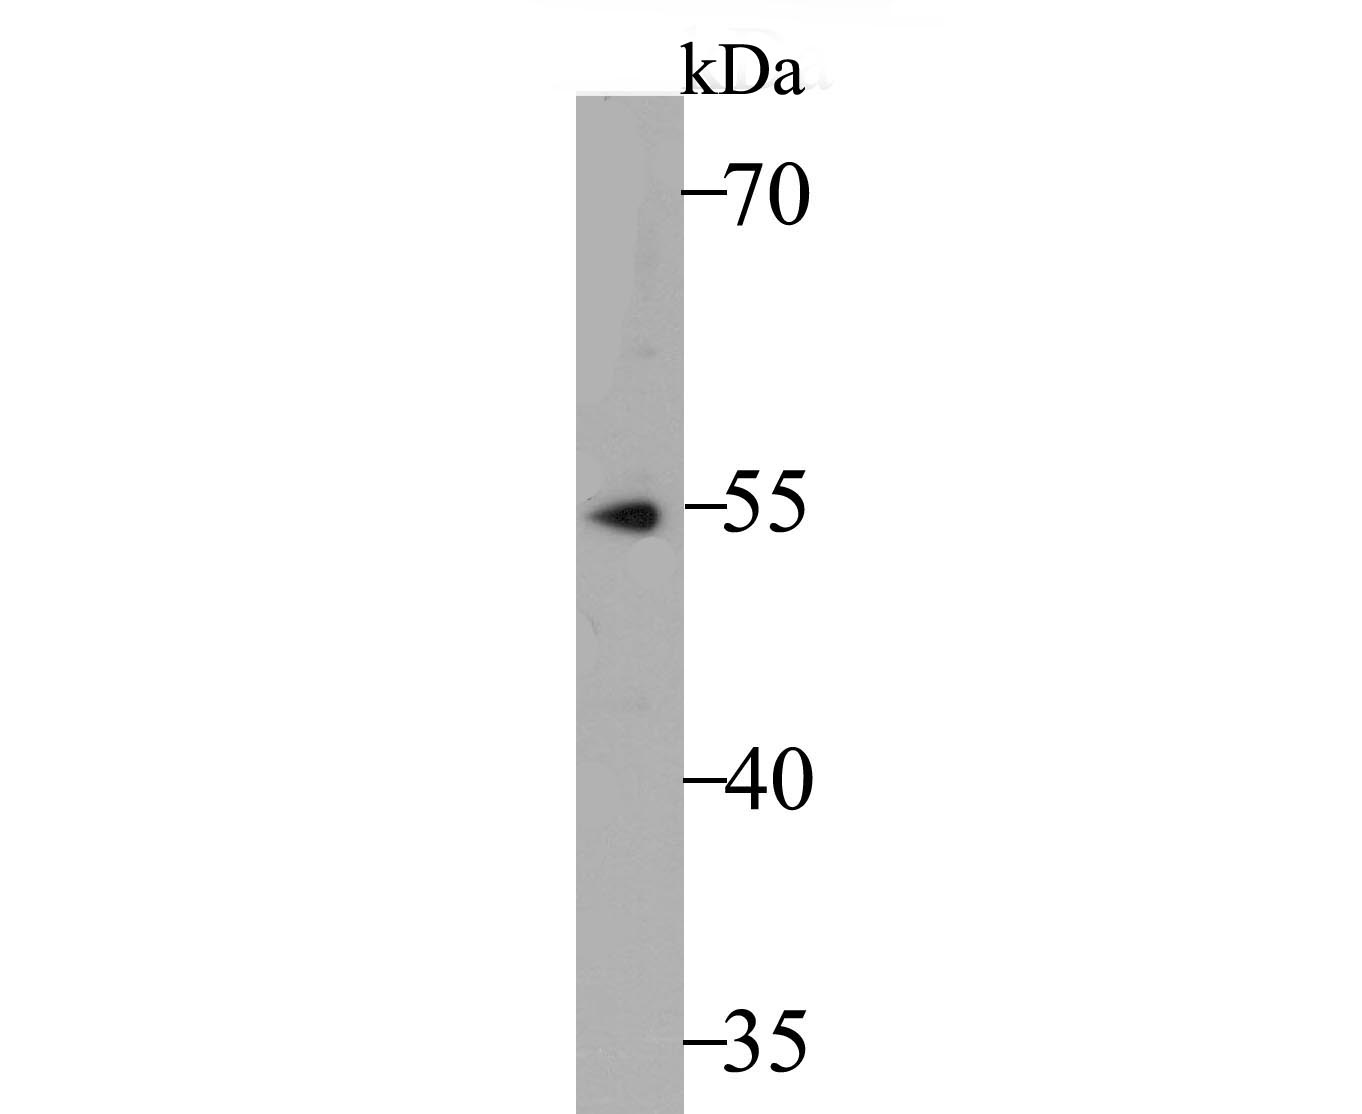 Western blot analysis of Fascin on SH-SY5Y cell lysate. Proteins were transferred to a PVDF membrane and blocked with 5% BSA in PBS for 1 hour at room temperature. The primary antibody was used at a 1:500 dilution in 5% BSA at room temperature for 2 hours. Goat Anti-Rabbit IgG - HRP Secondary Antibody (HA1001) at 1:5,000 dilution was used for 1 hour at room temperature.